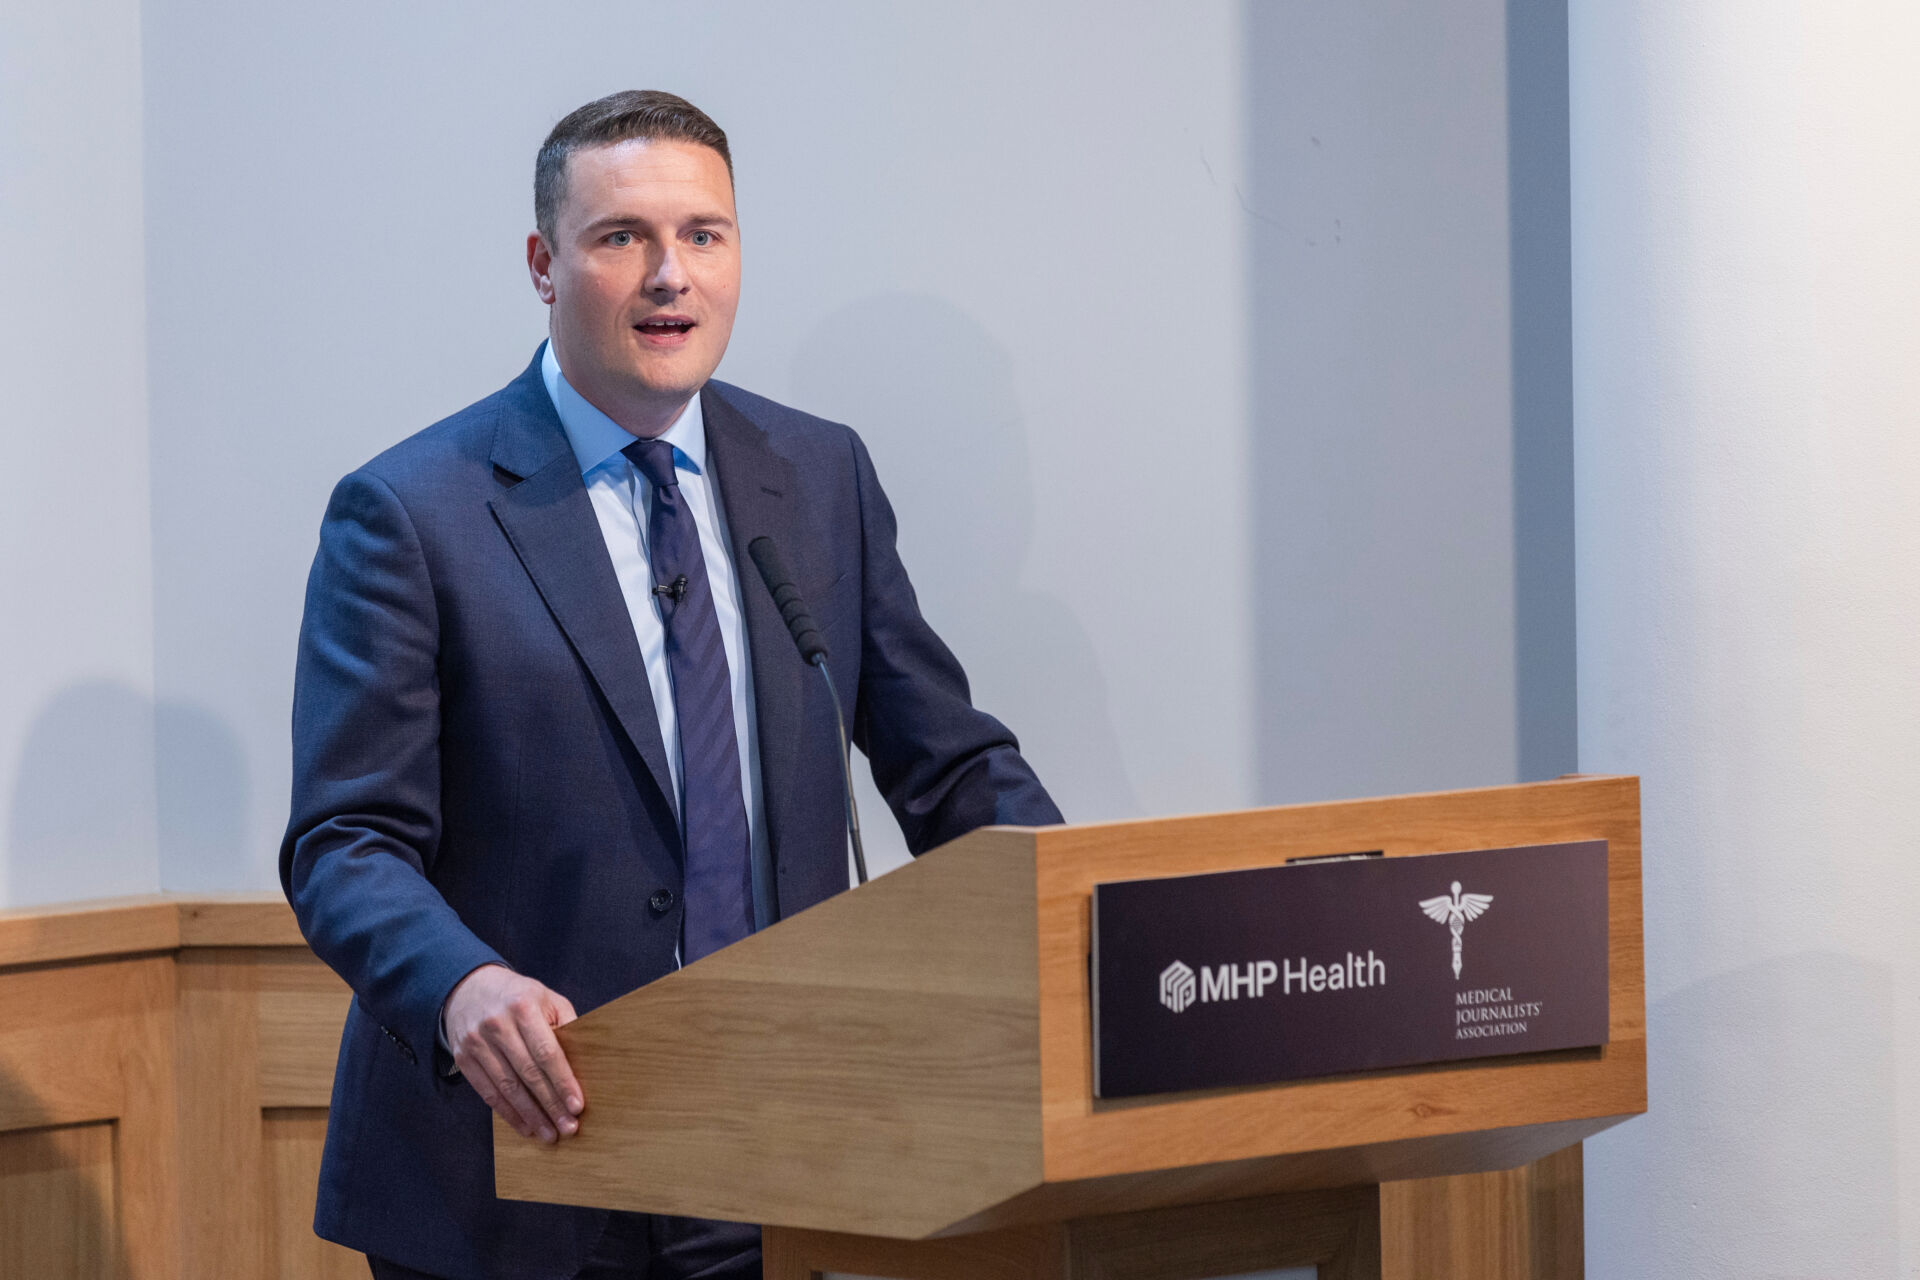 Wes Streeting MJA event primary care budget ought to increase